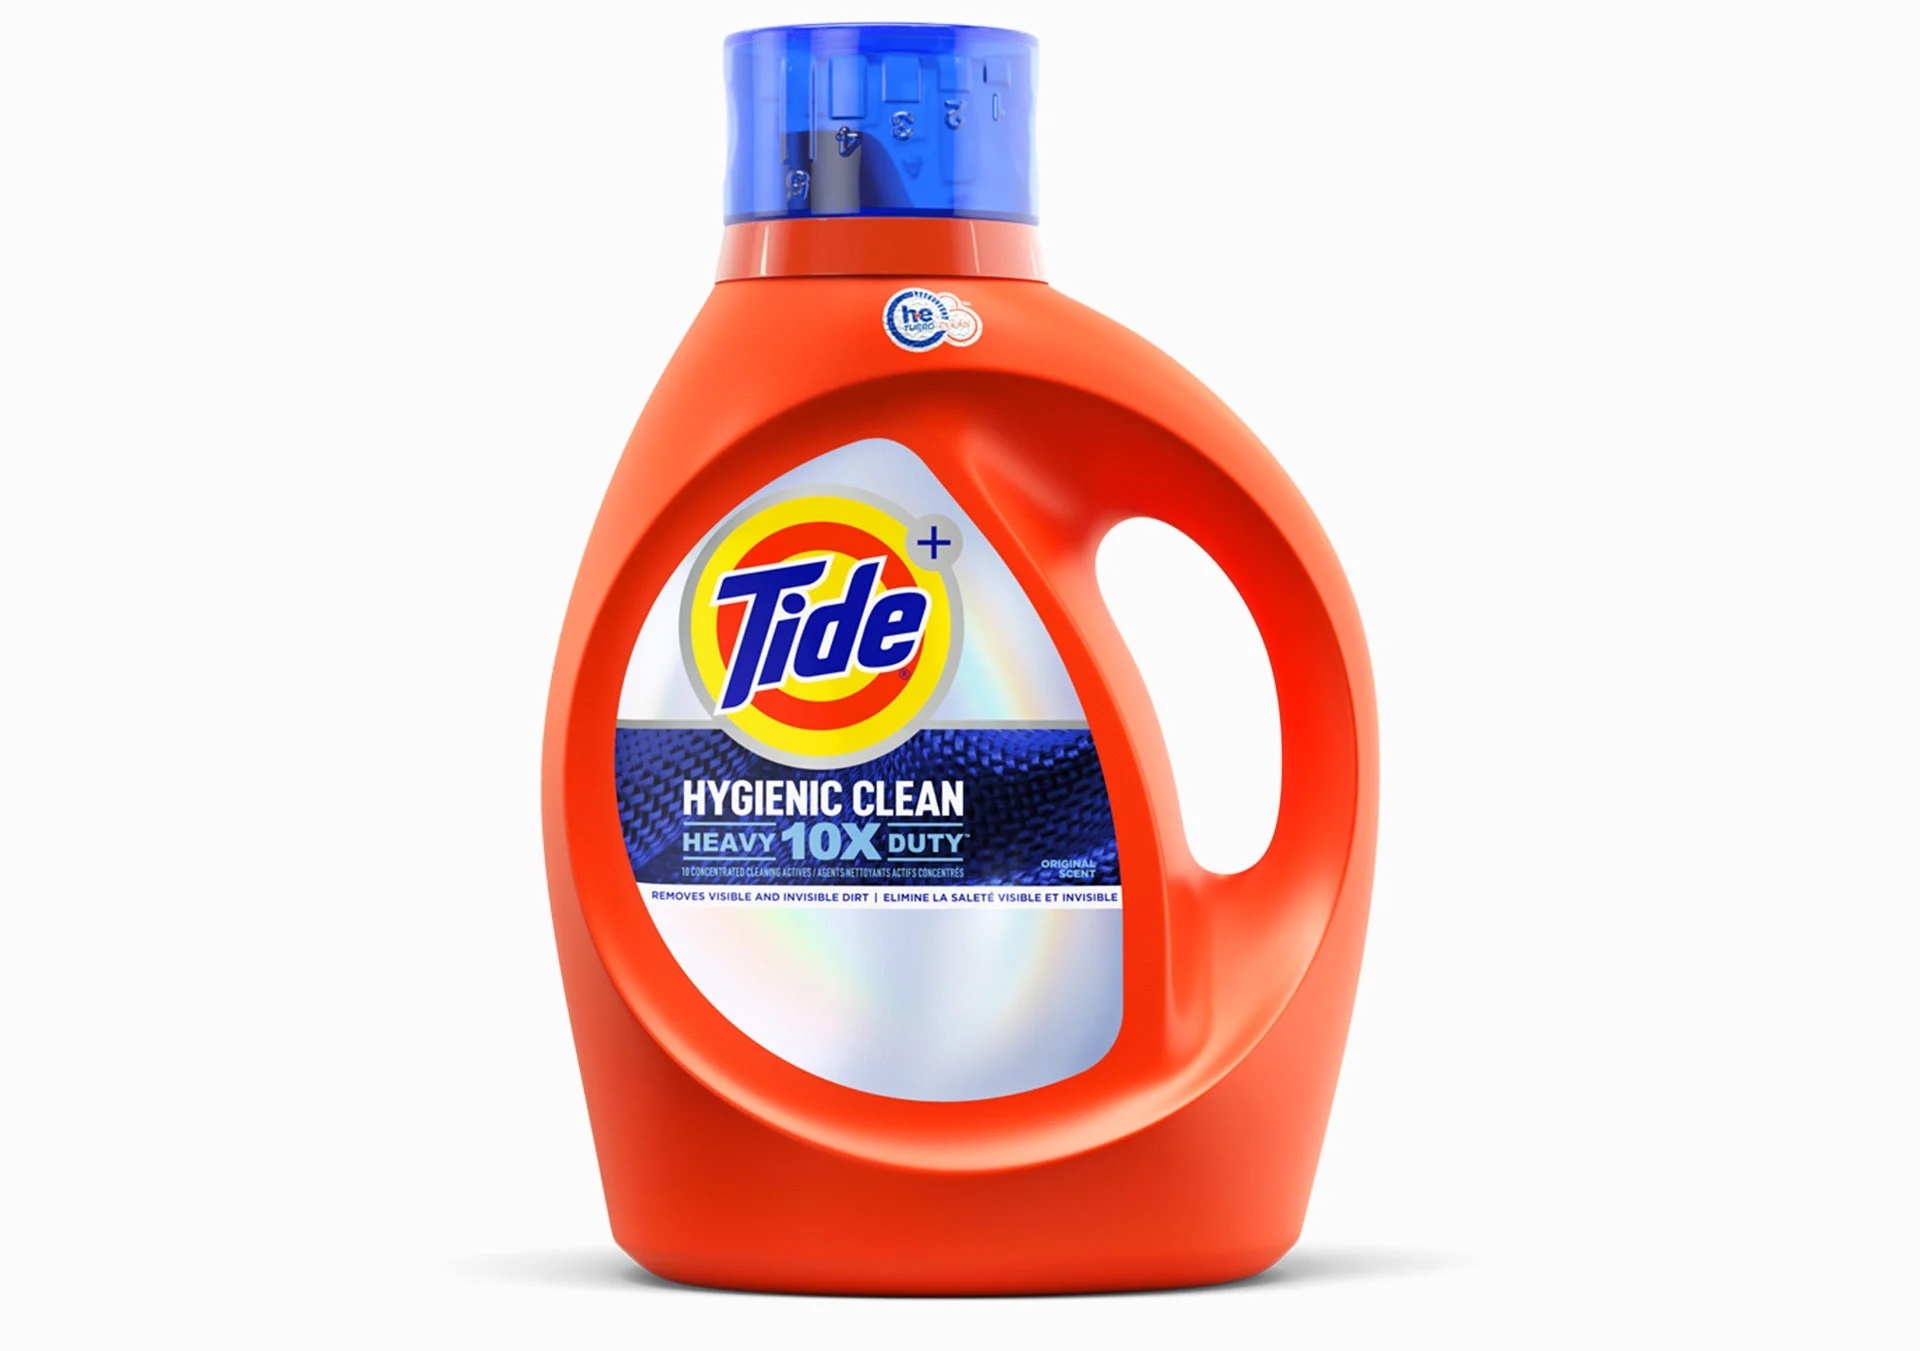 Tide Cold Water Wash Detergent Hygienic Clean